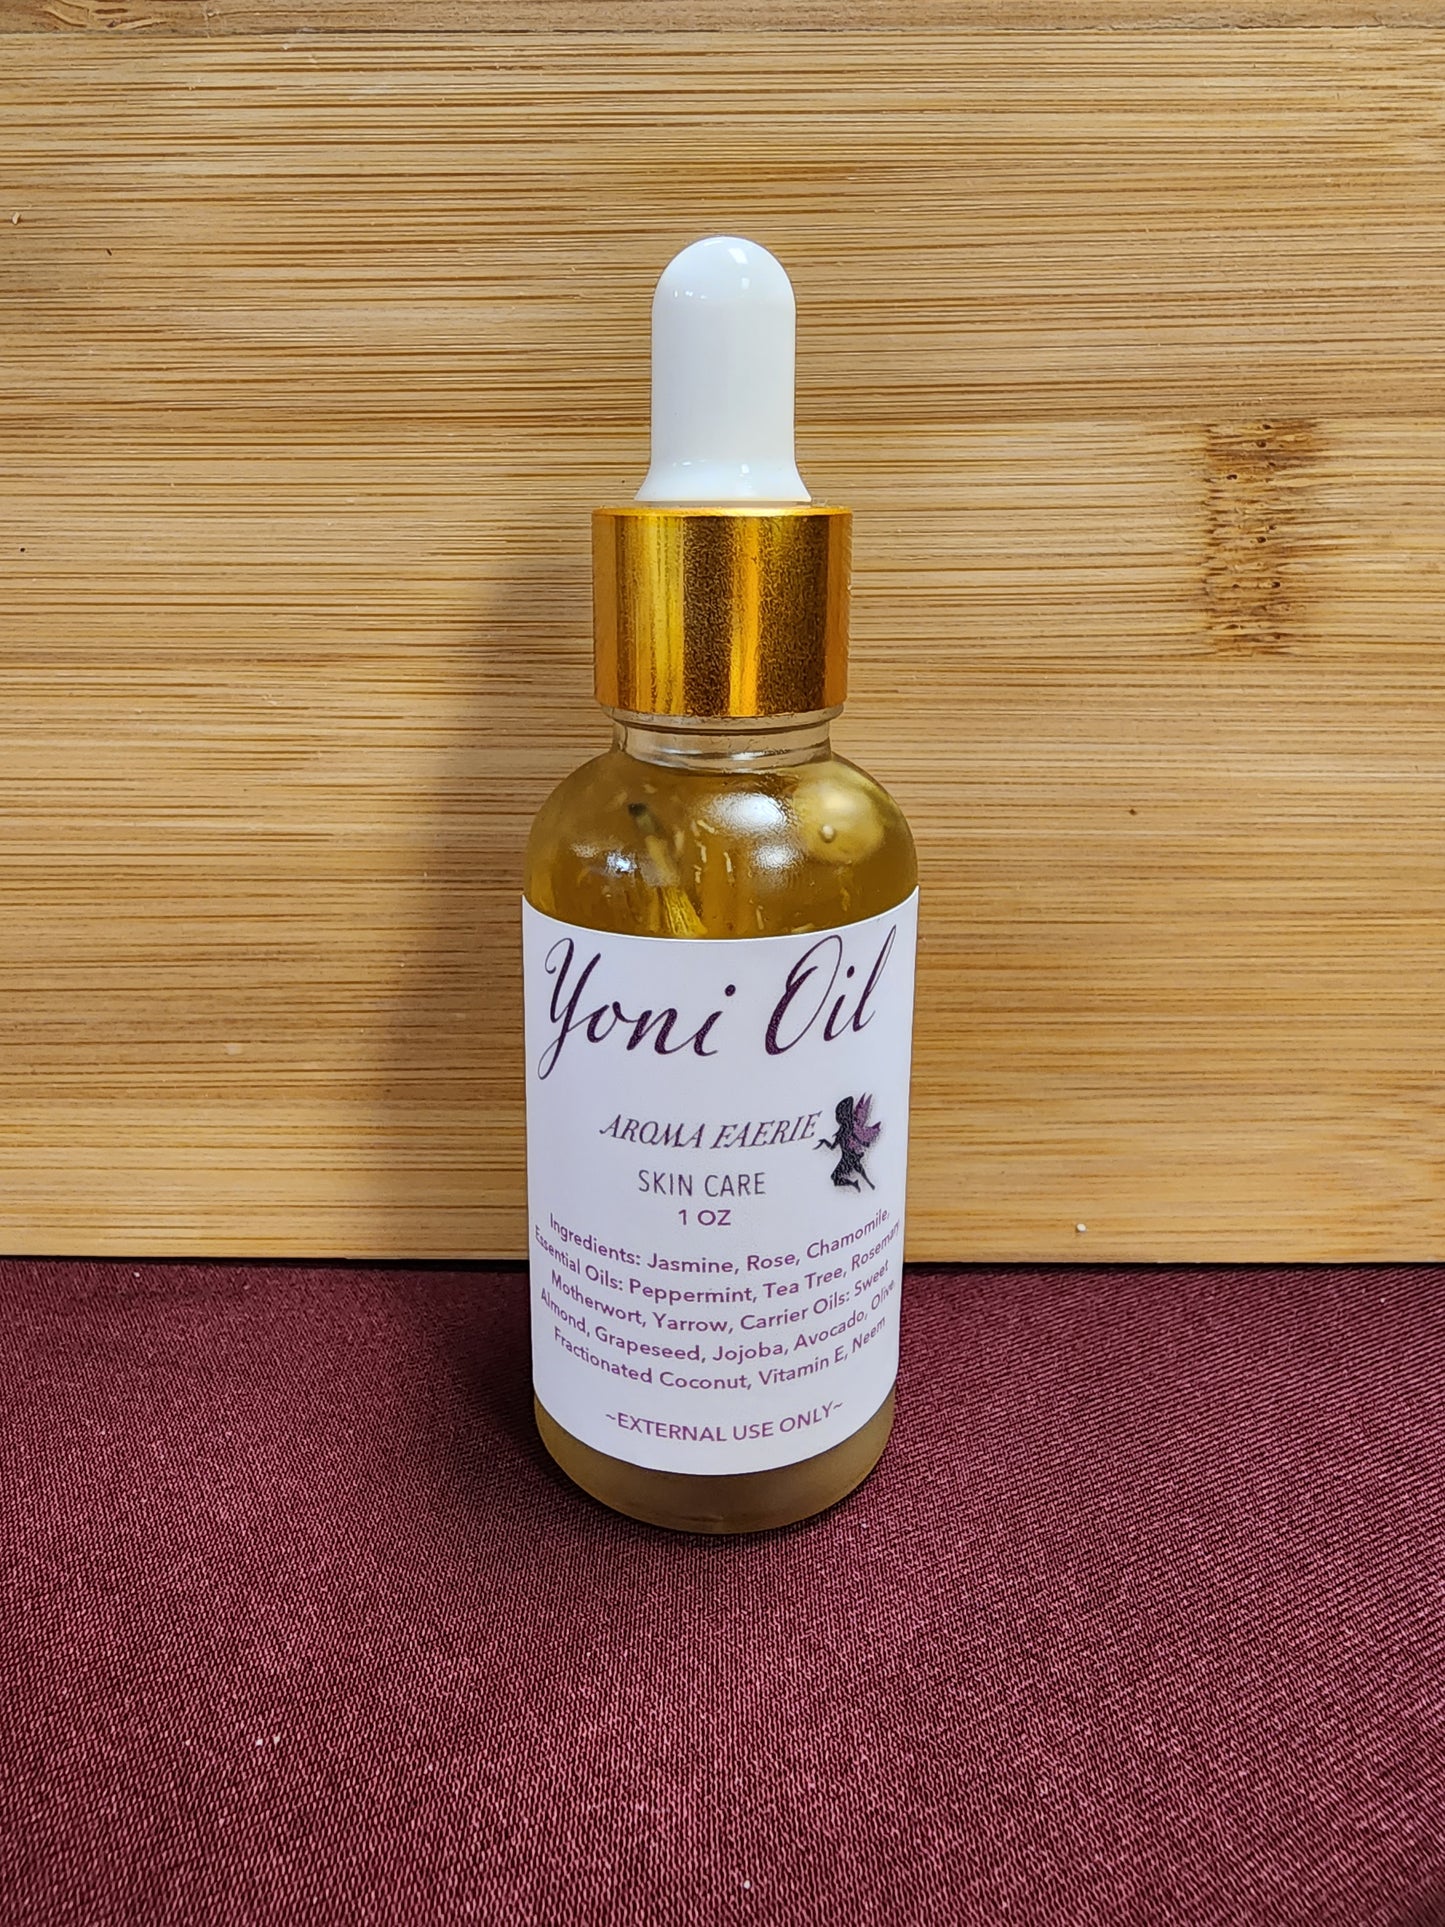 Yoni Oil Infused with Herbs